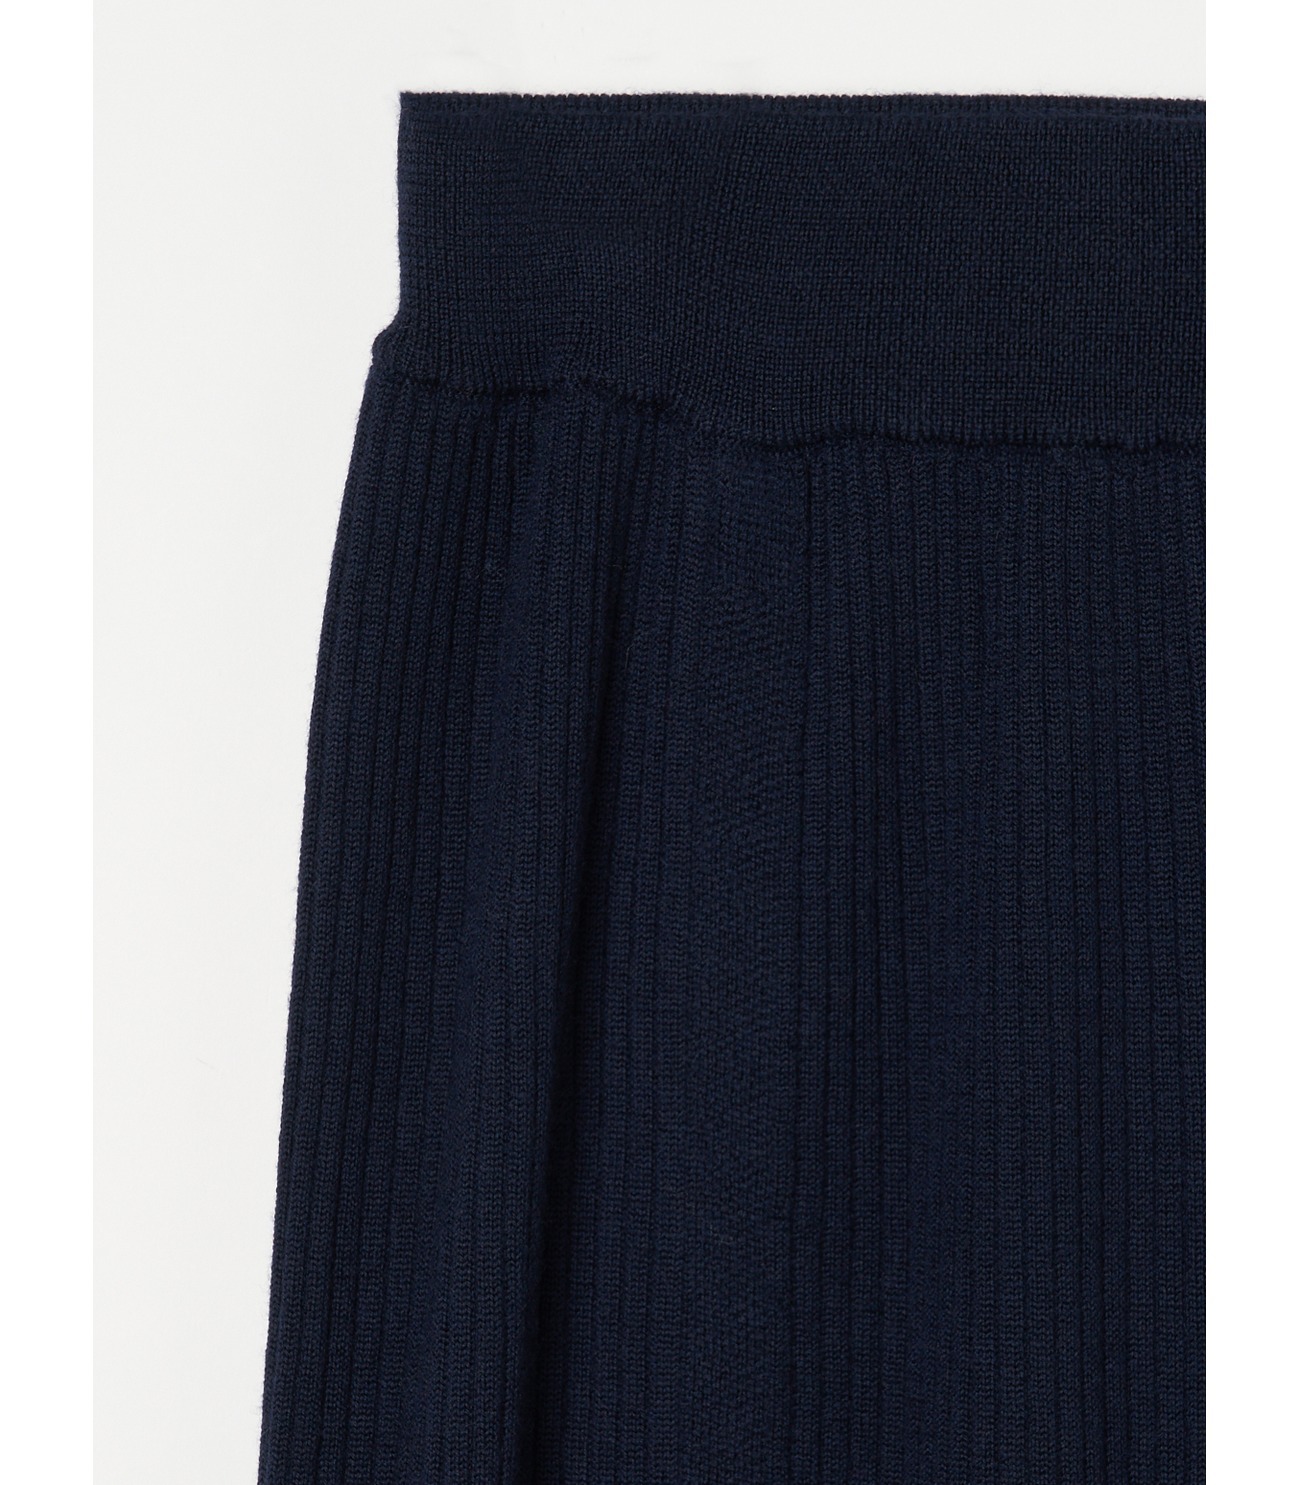 Wool outfit semi wide slit pant 詳細画像 navy 3